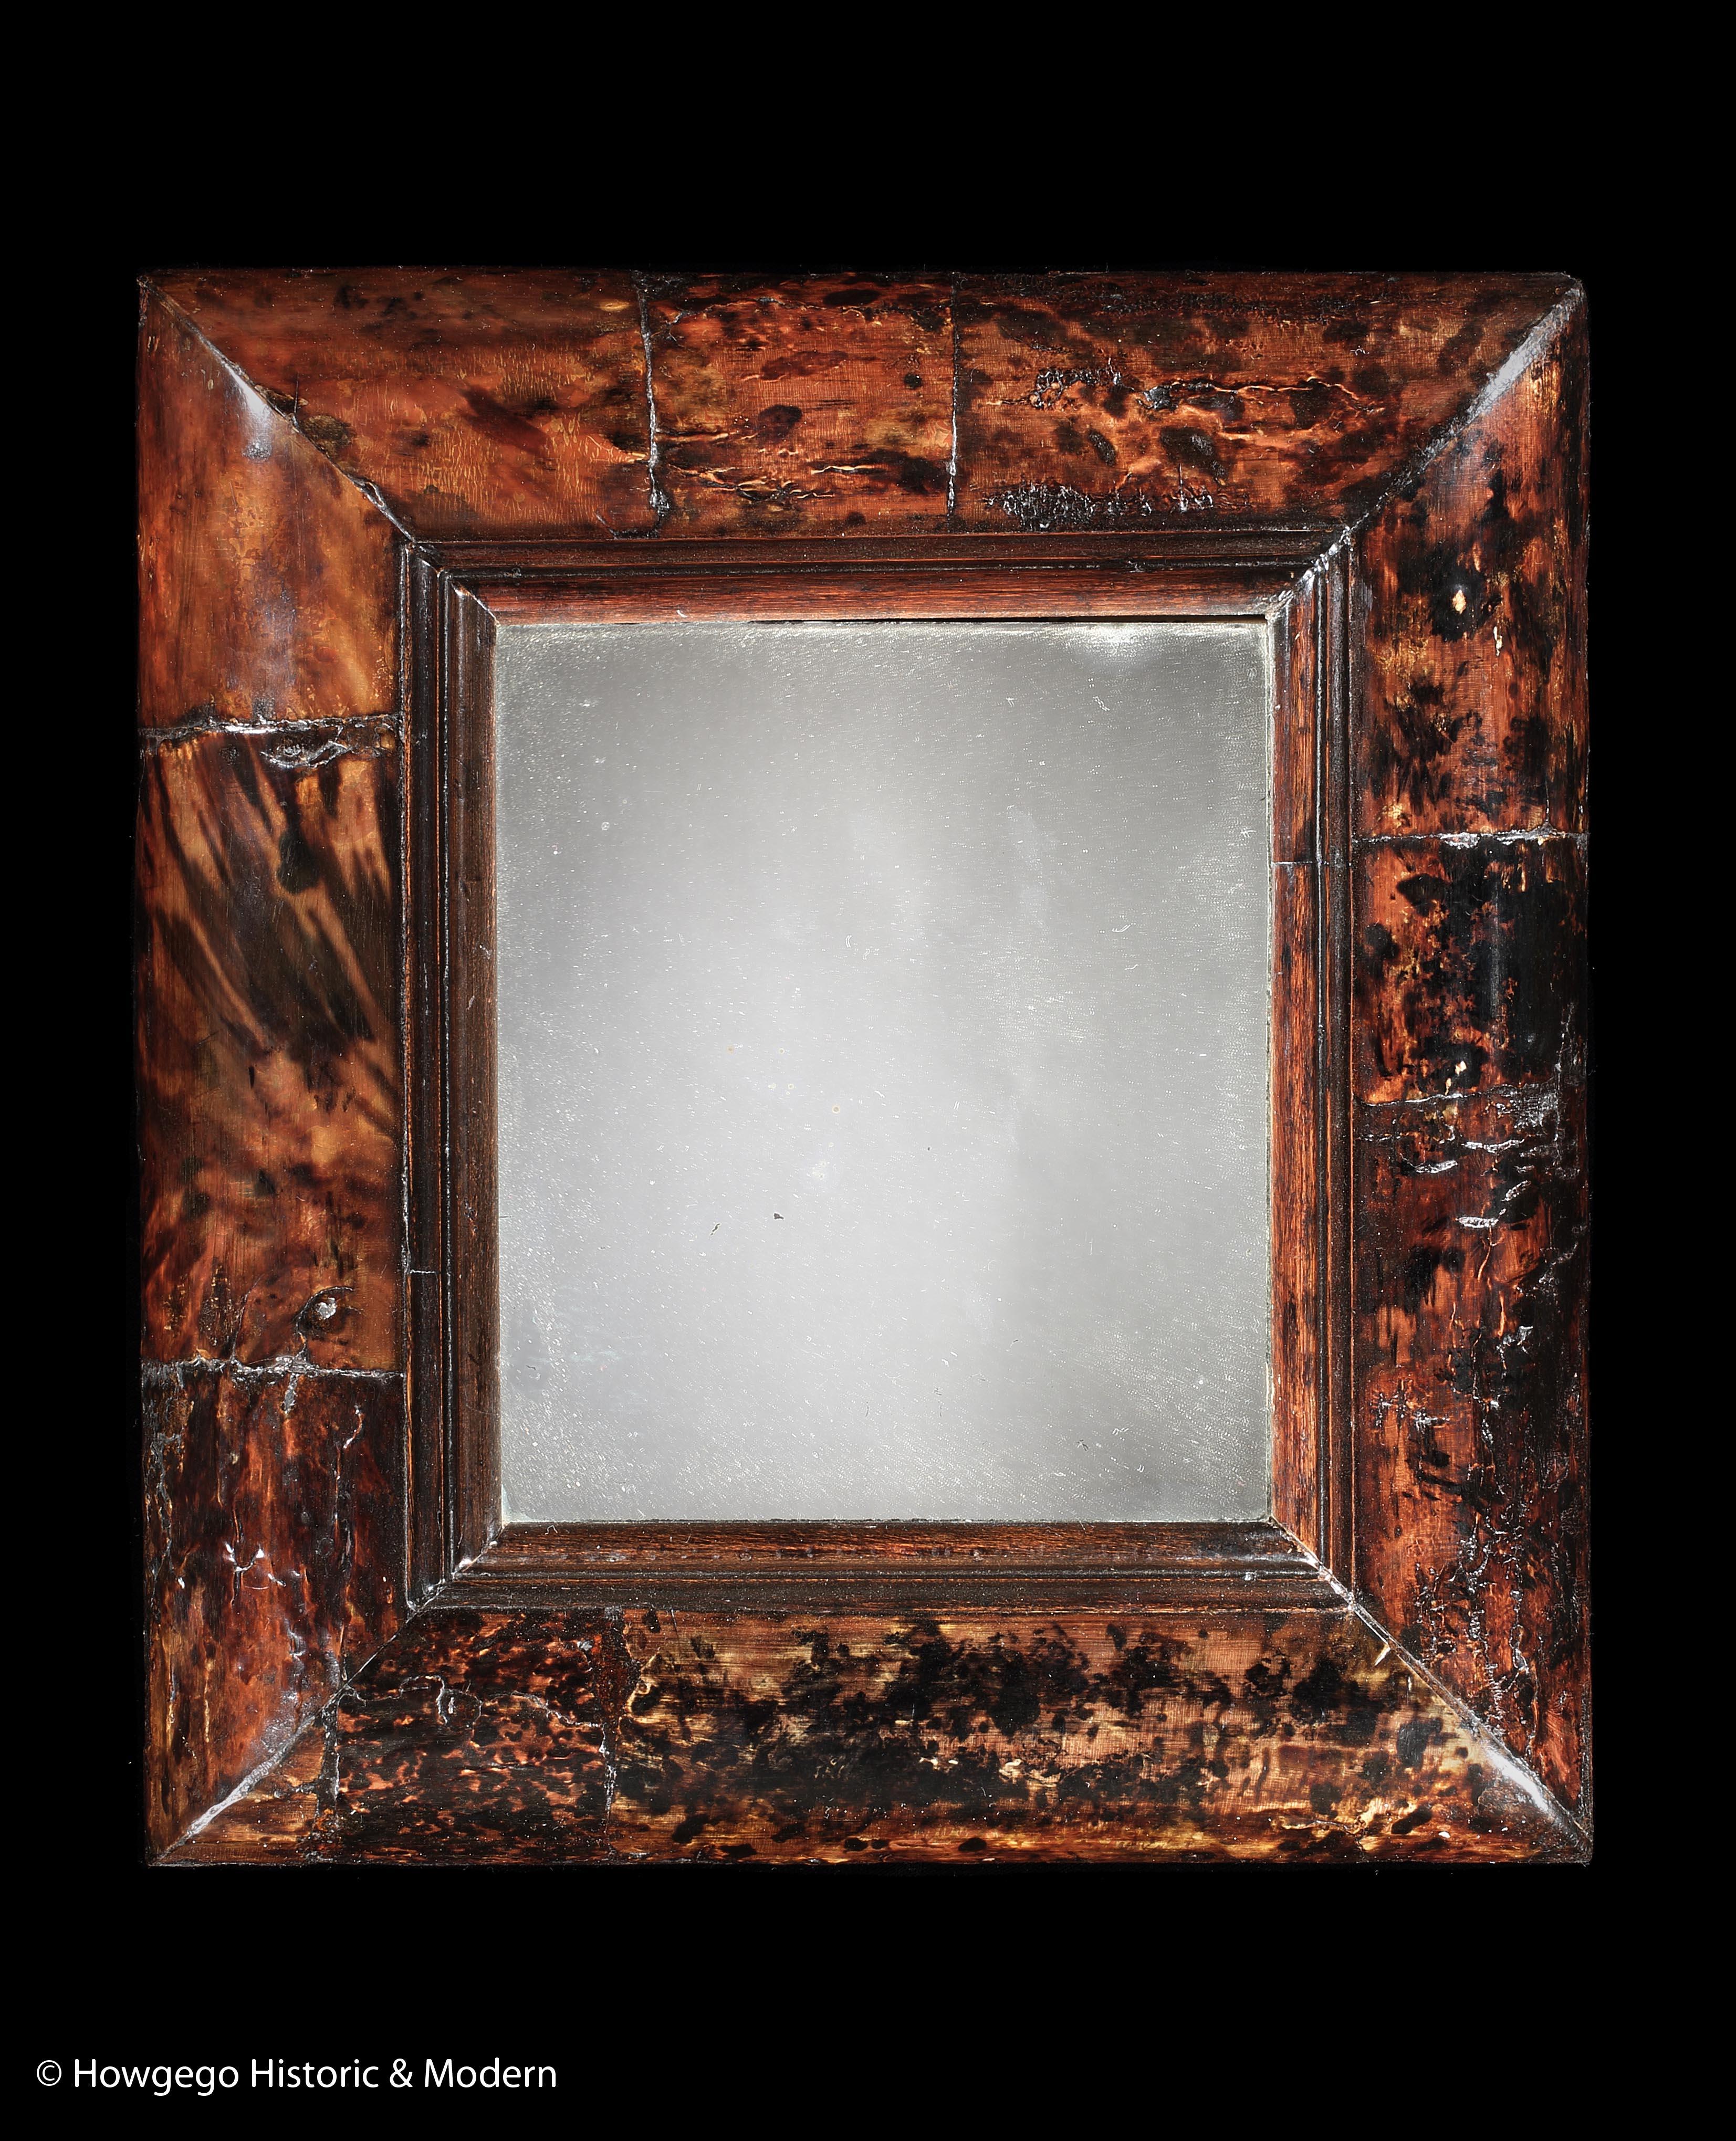 Rare, mid-17th century, Tortoishell, small, cushion framed, mirror with the original plate & back, length 14 ½” height 16”, depth 2½”
The tortoishell is striking and was highly prized as an elite, luxurious ornamental gem for its exotic nature and